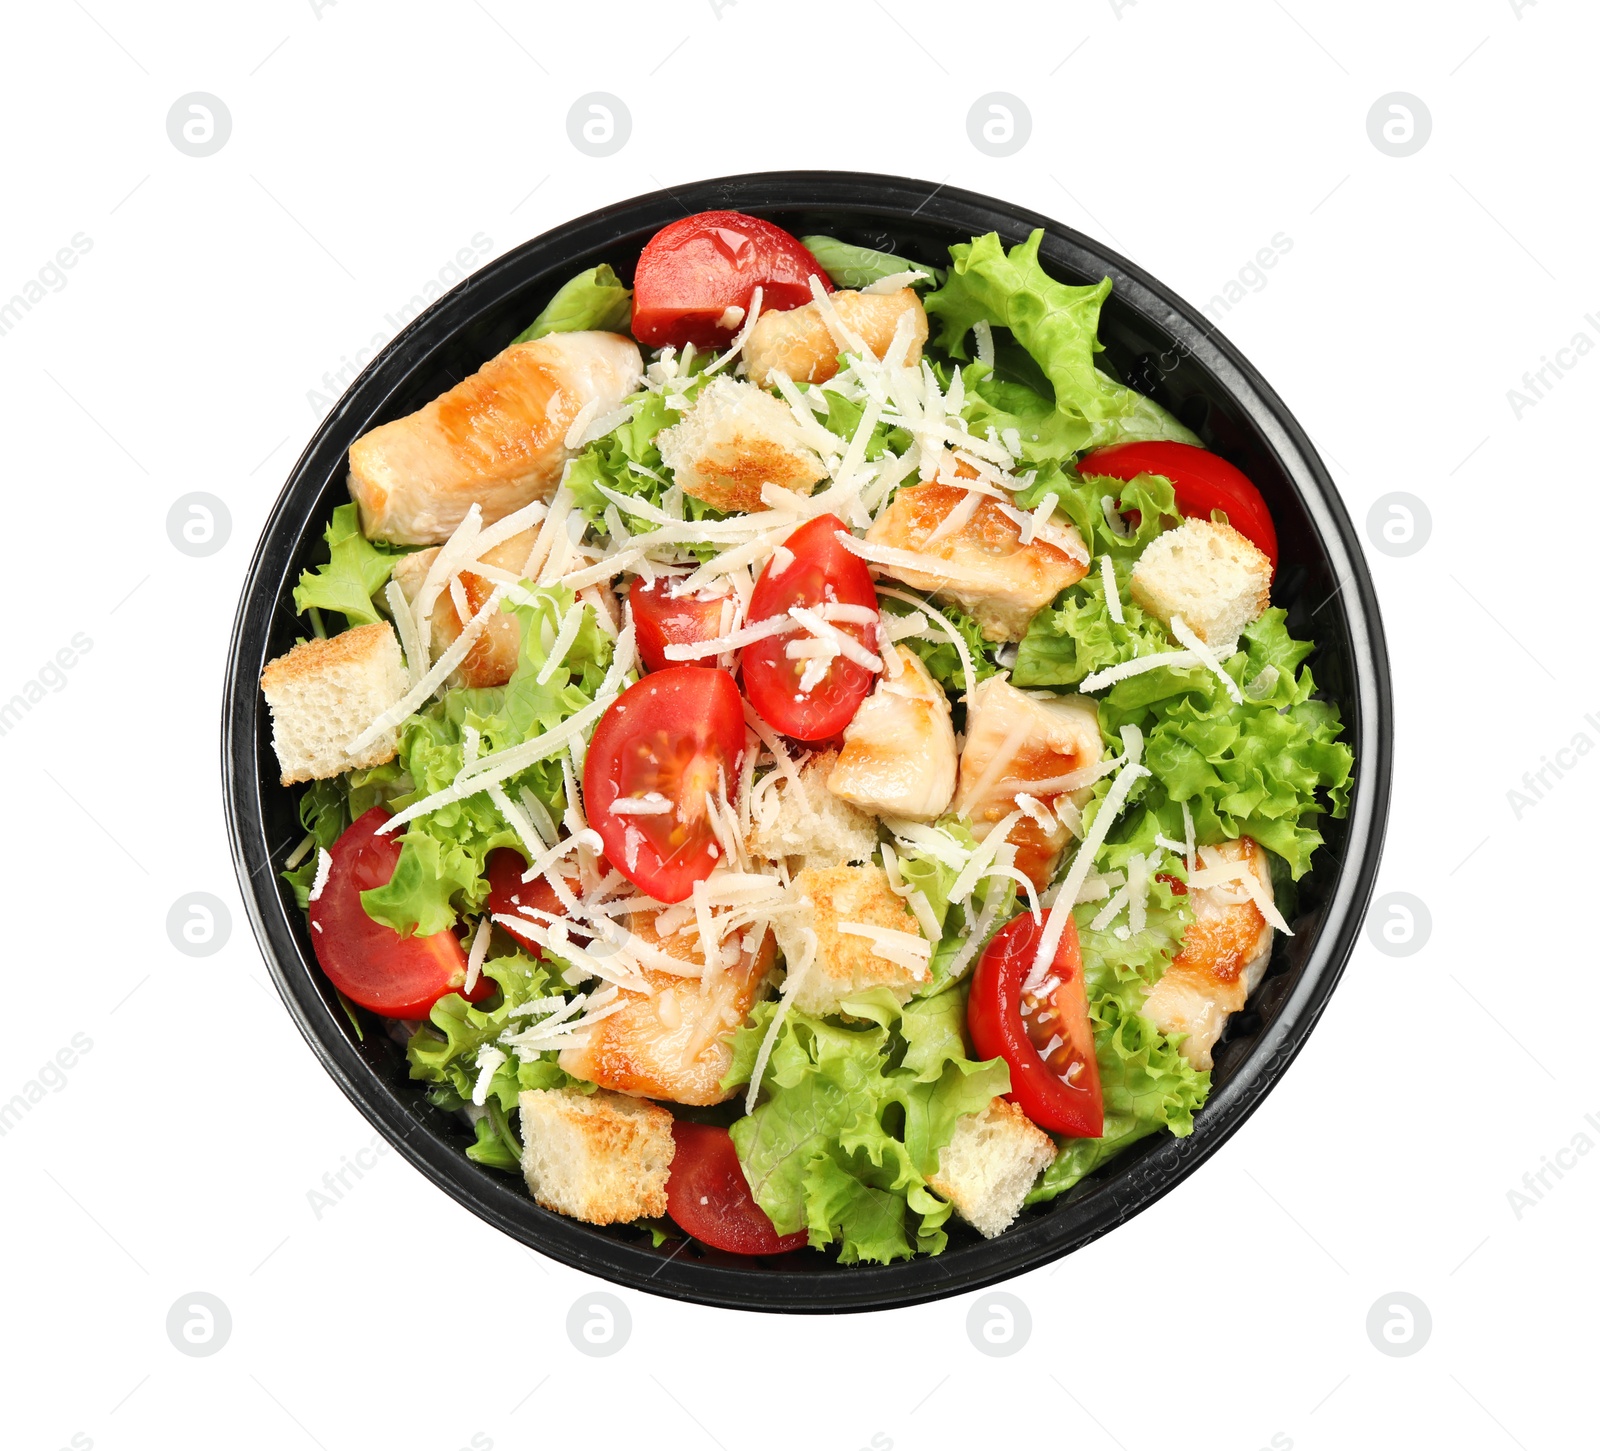 Image of Delicious fresh salad in plastic container on white background, top view